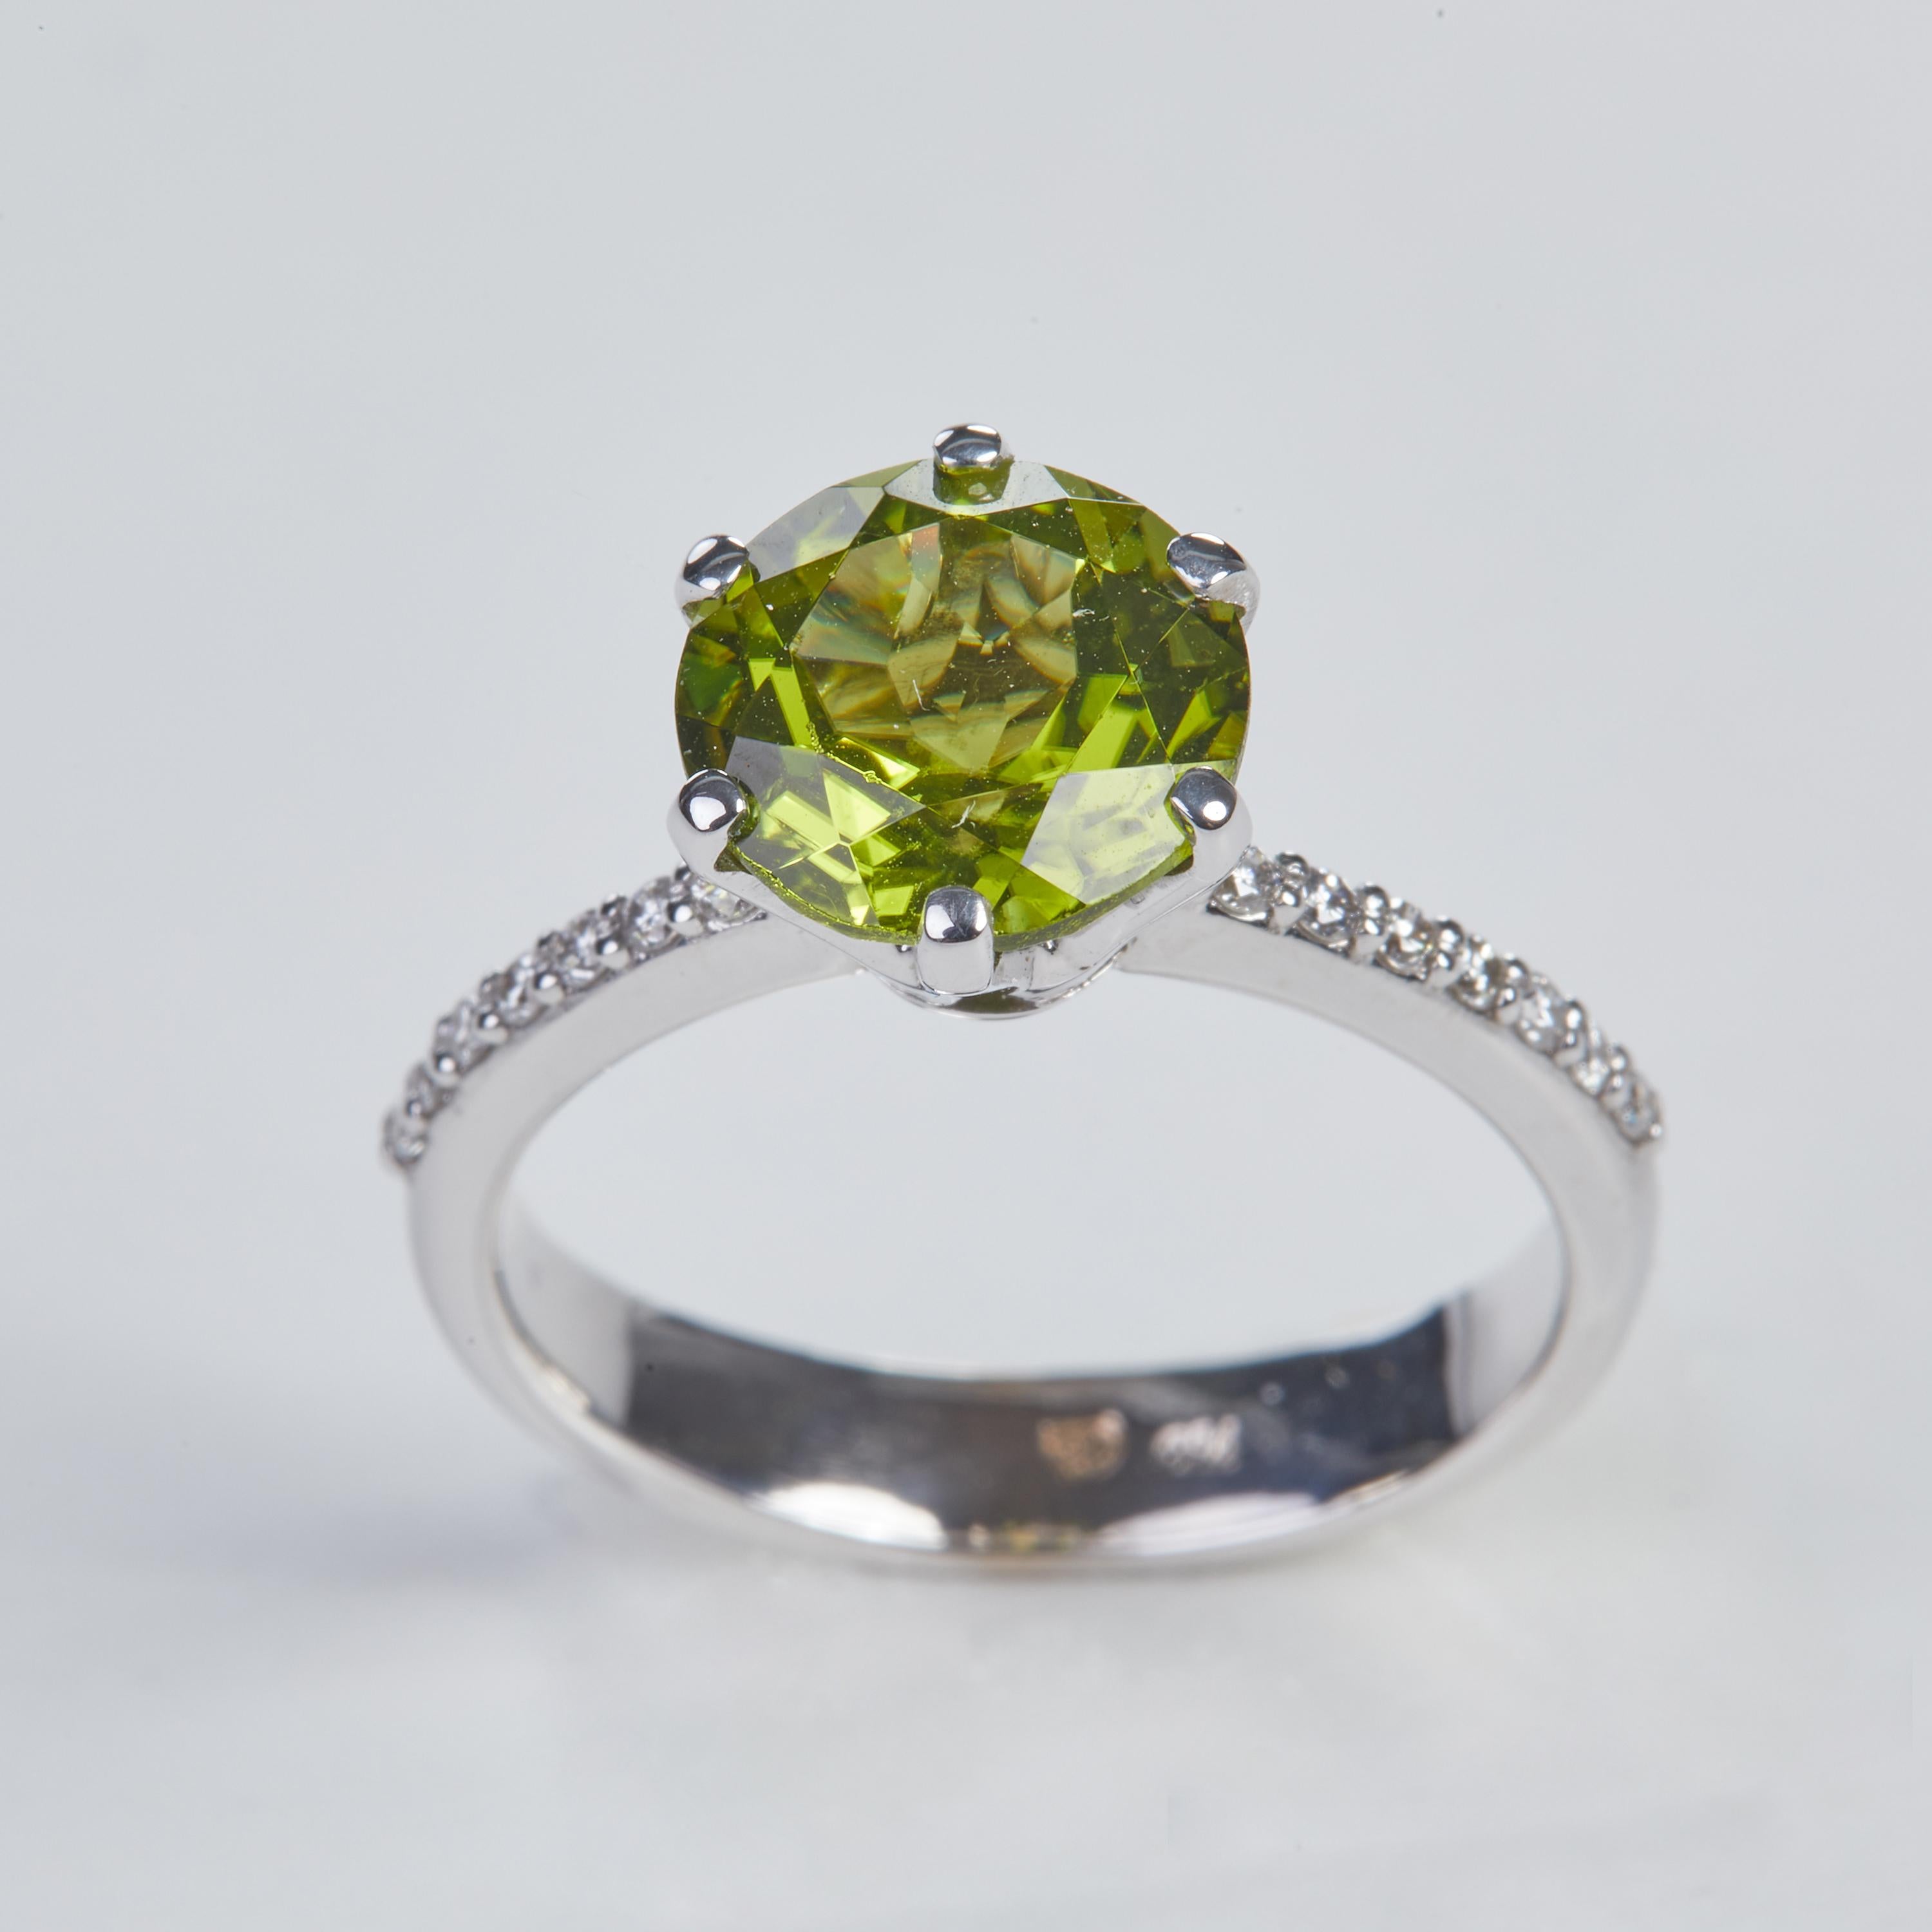 18 Karat White Gold Diamond and Peridot Fashion and klassik Ring

14 Diamonds 0.14 Carat
1 Peridot  3,06 carat



Size EU 54 US 6.8


Founded in 1974, Gianni Lazzaro is a family-owned jewelery company based out of Düsseldorf, Germany.
Although